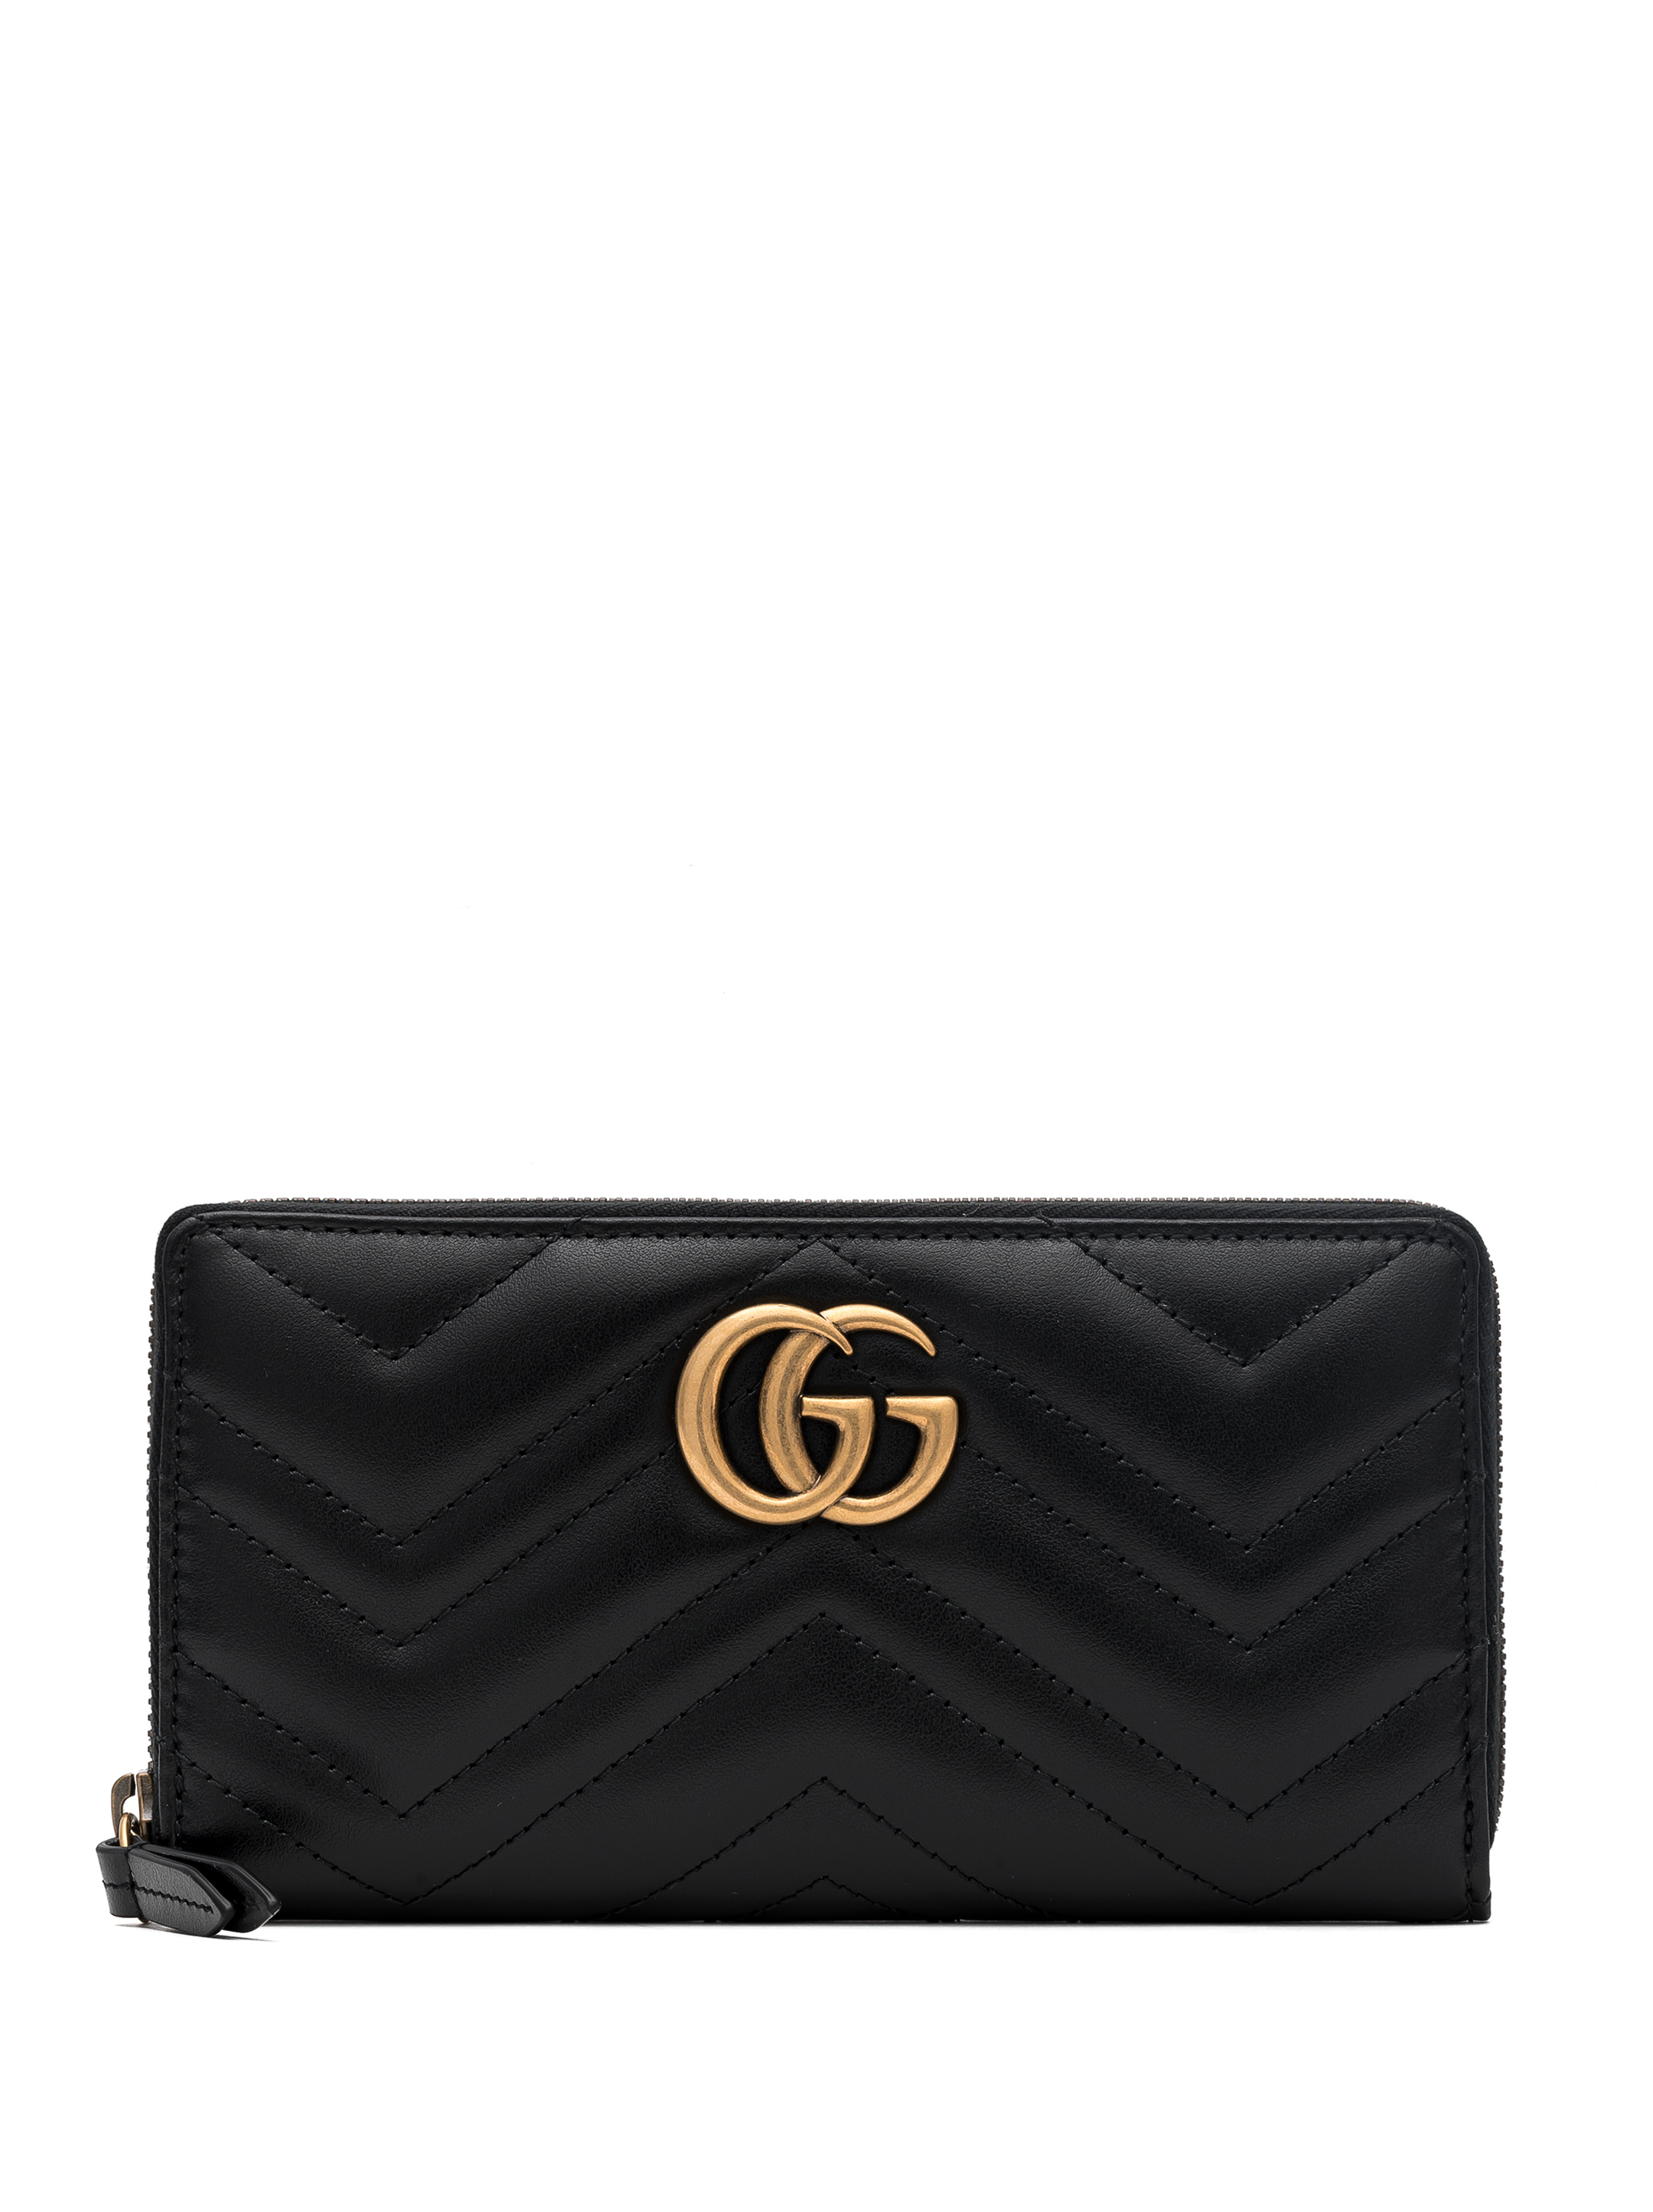 terrorist patrice Himmel Gucci women's Wallet GG Marmont - buy for 364800 KZT in the official Viled  online store, art. 443123 DTD1T.1000_U_222